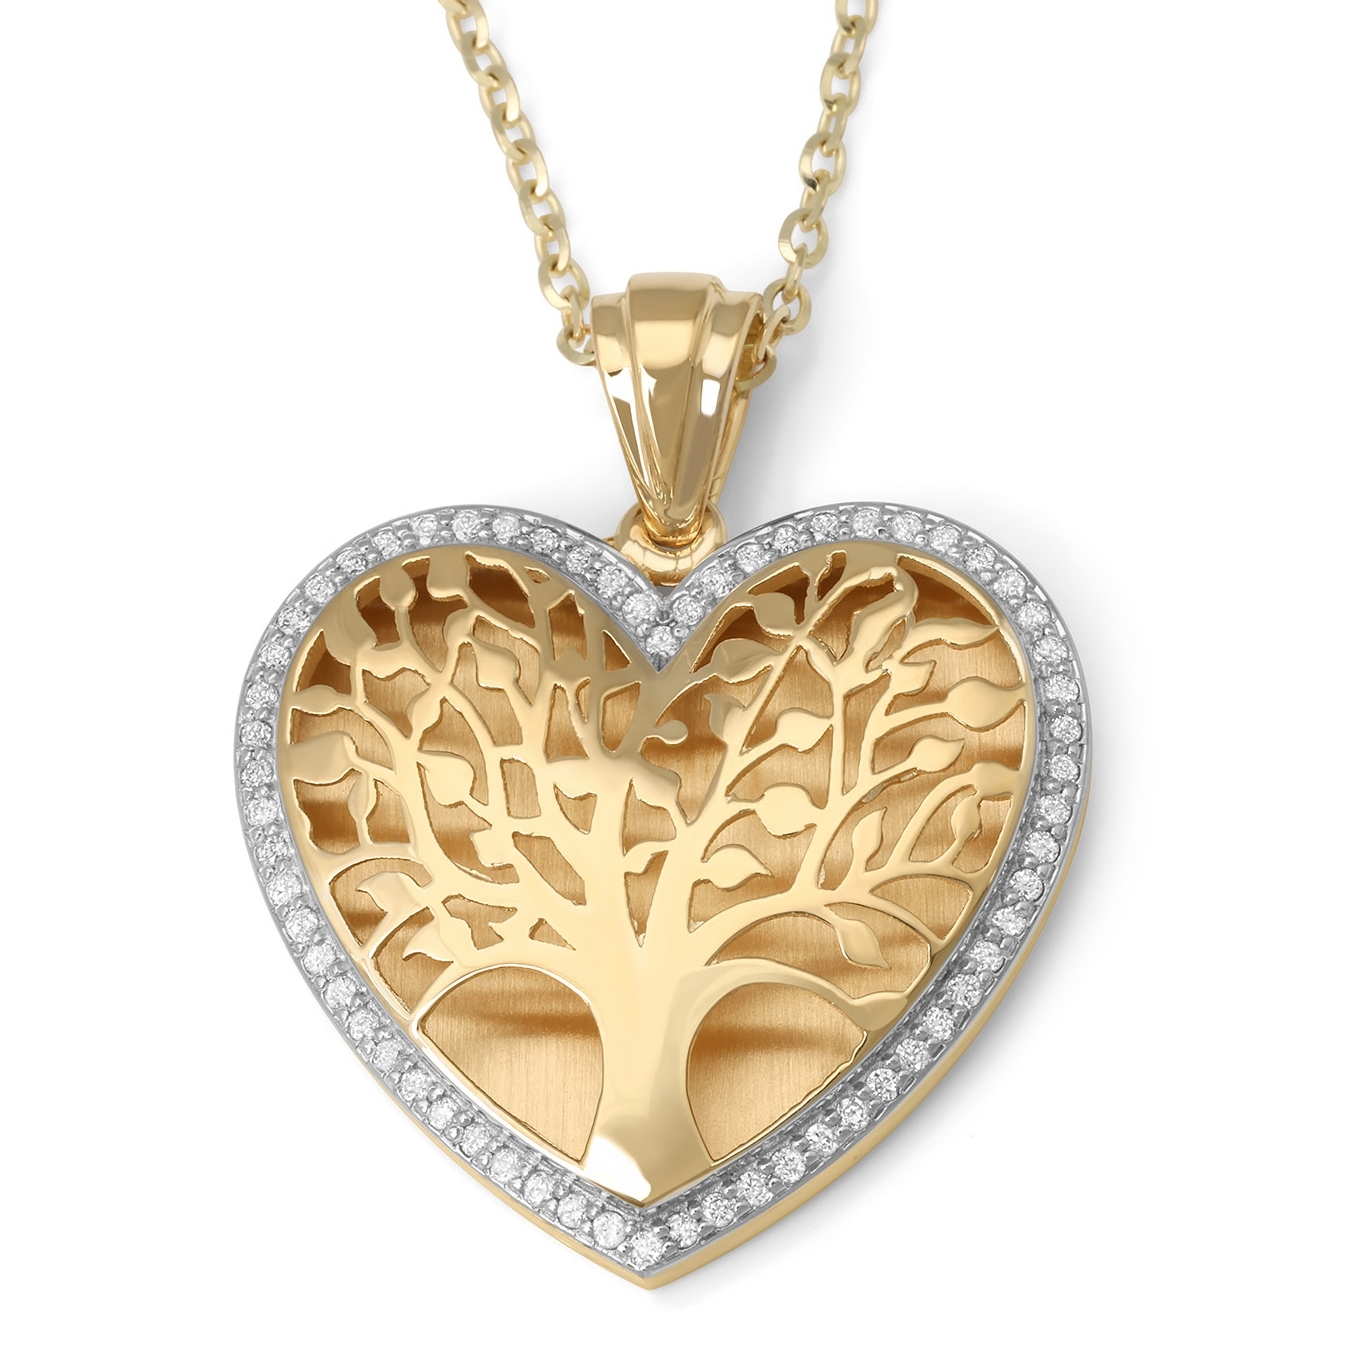 14K Gold Large Heart Shaped Tree of Life Pendant with Diamonds - 1